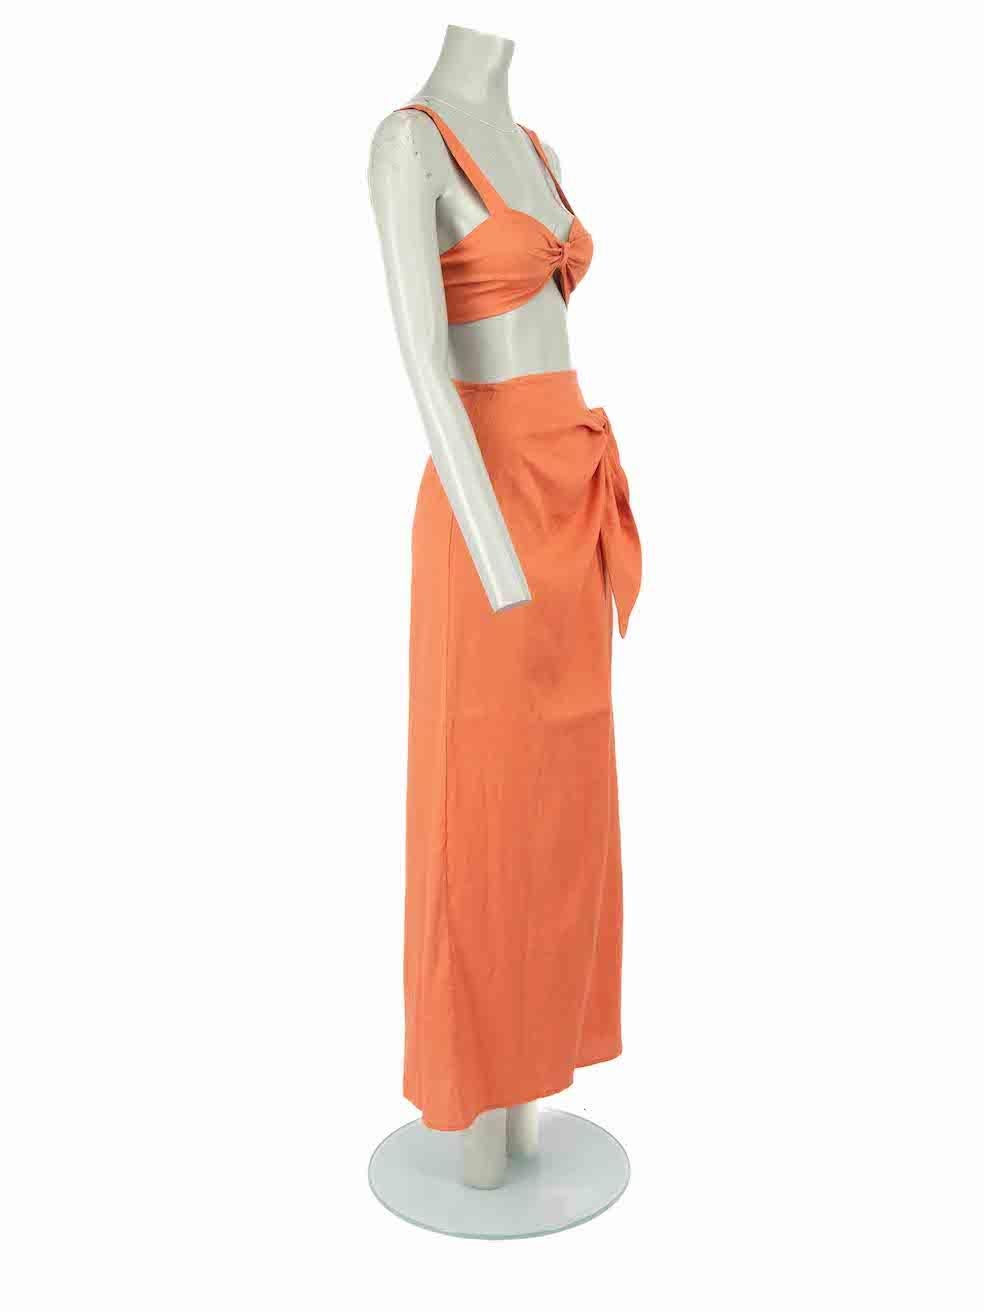 CONDITION is Very good. Hardly any visible wear to set is evident on this used LPA designer resale item.
 
 Details
 Orange
 Linen
 Top and skirt set
 Crop top
 Bow detail
 Sleeveless
 Adjustable straps
 Back hook fastening
 Wrap skirt
 Maxi
 Button